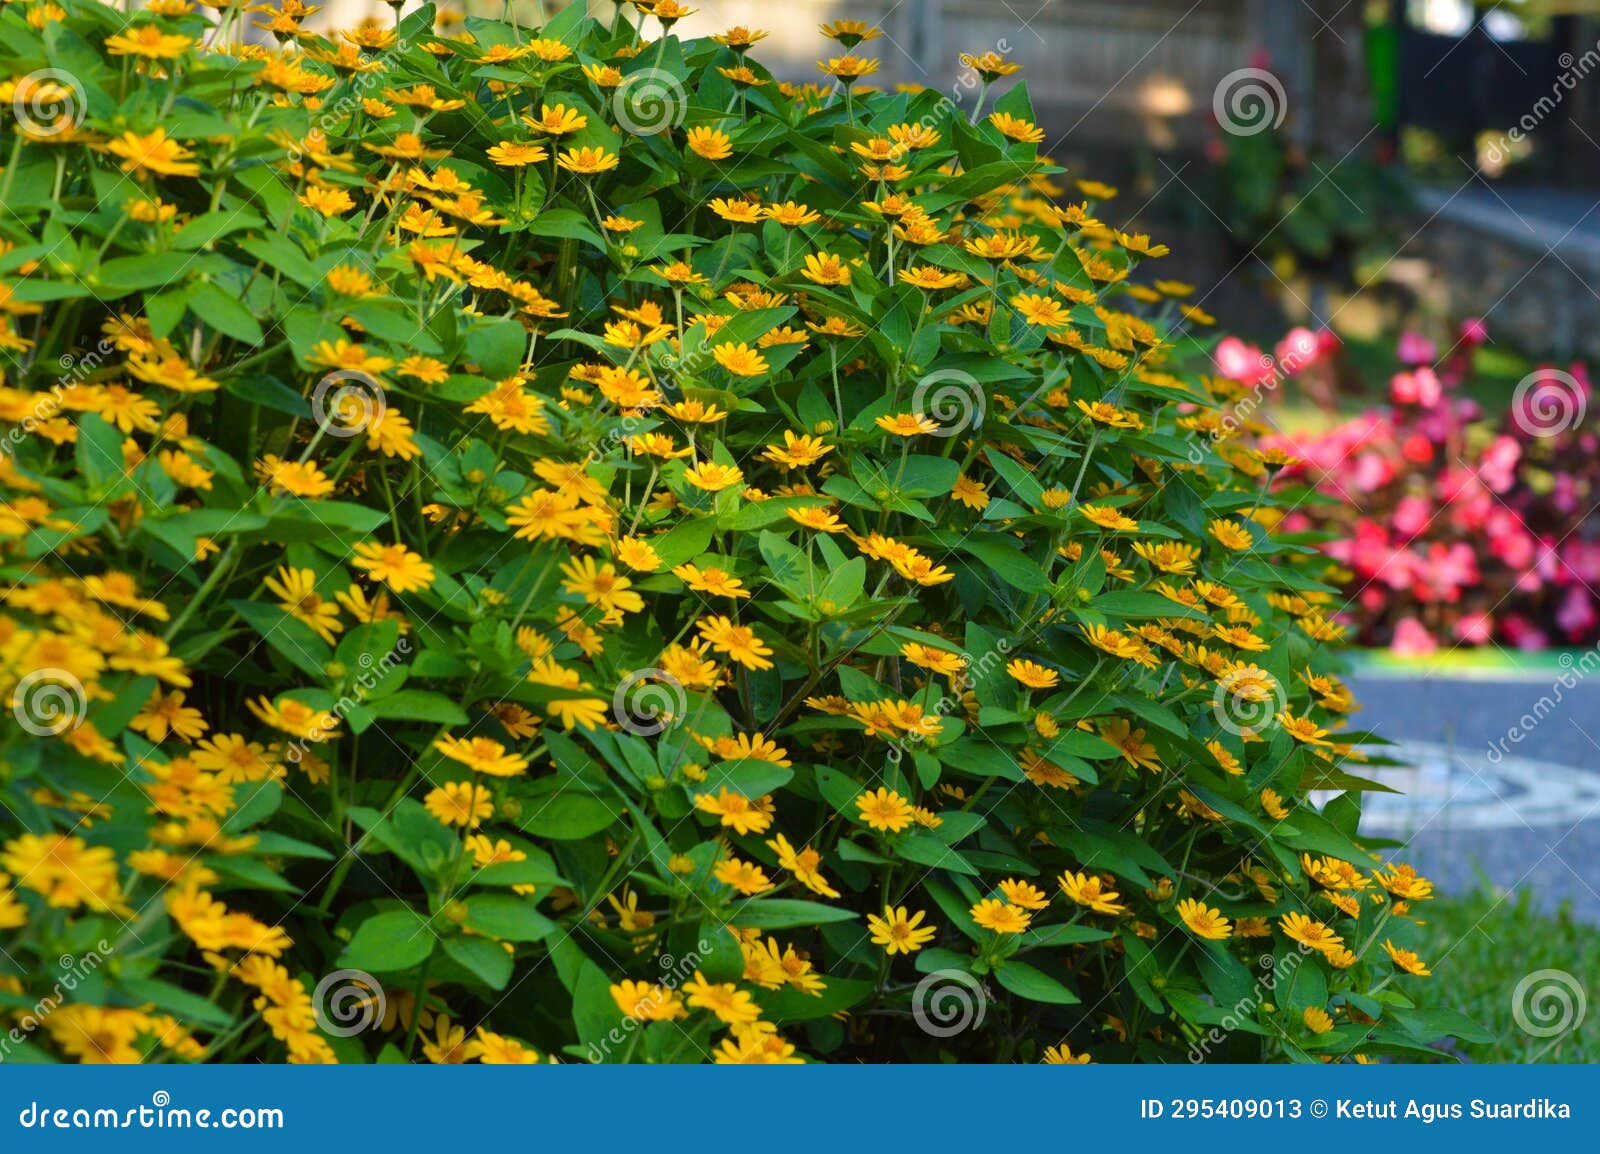 beauty of small yellow-flowered melampodium divaricatum plants scattered among their leaves in the garden